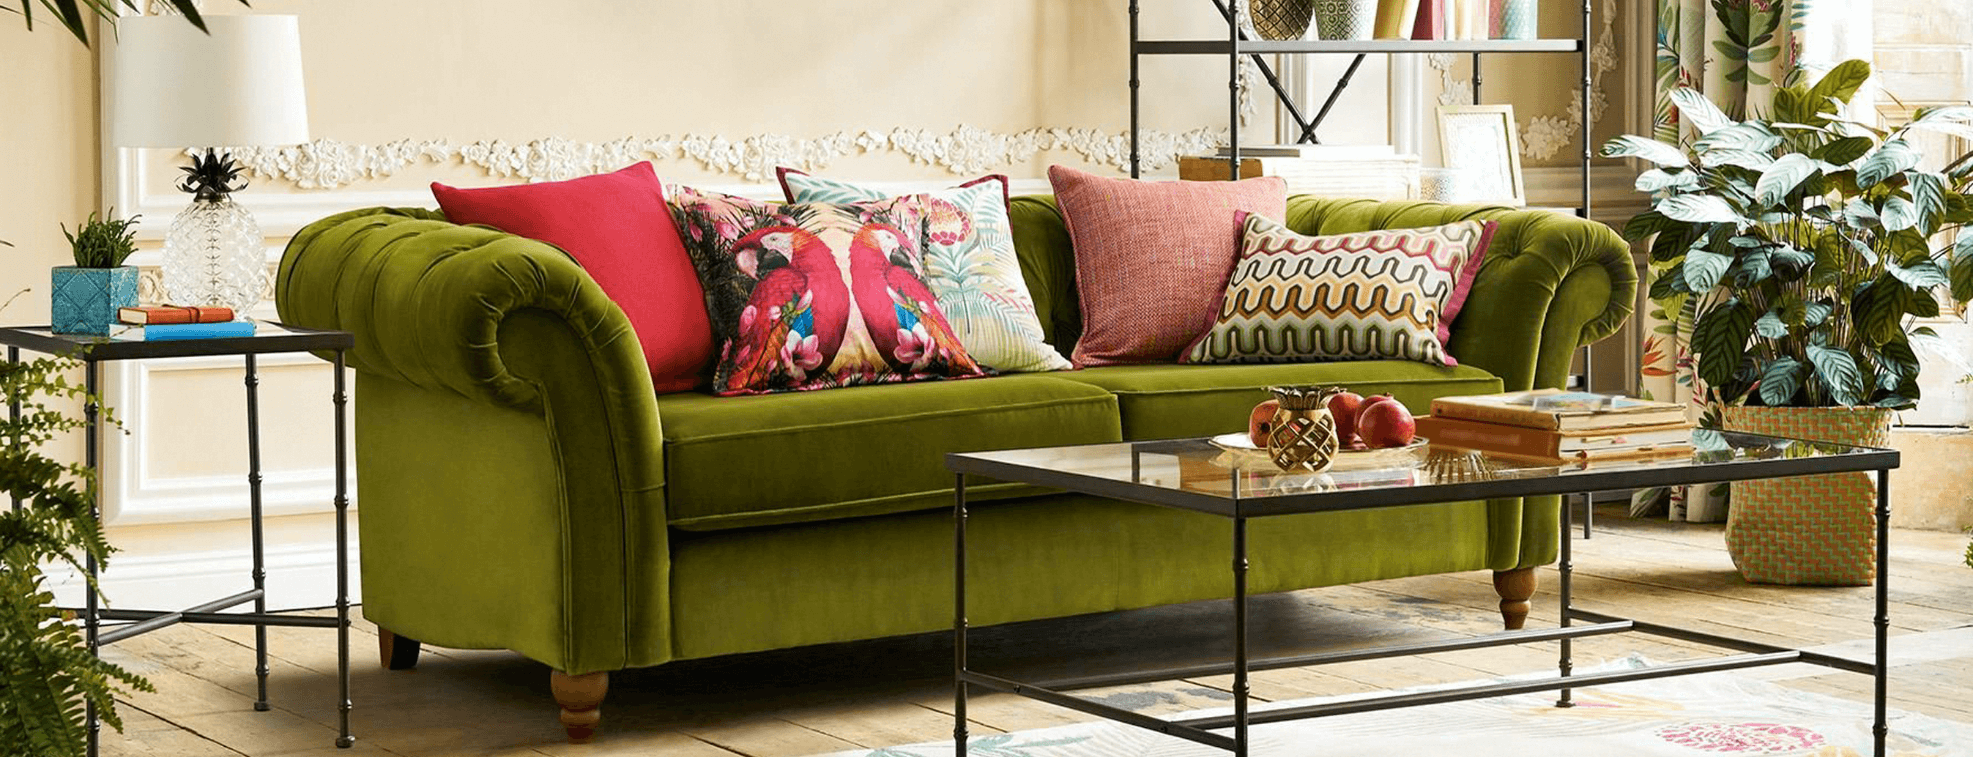 Bohemian interior design with many bright pillows